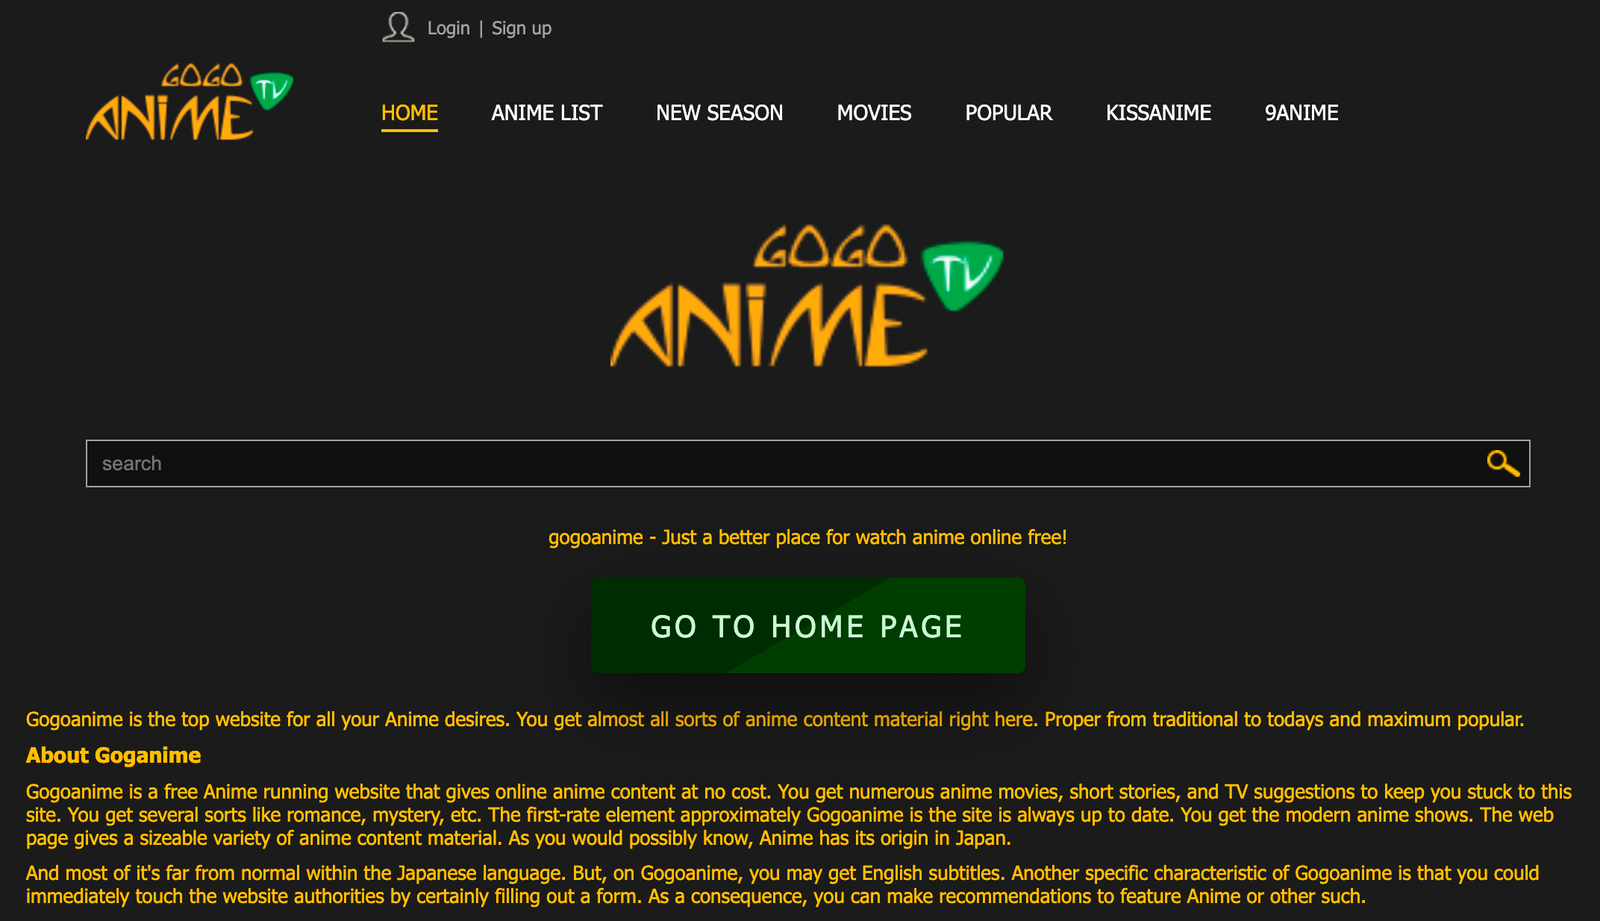 Safety of Gogoanime: Is It Down or Safe to Use Go Go Anime?